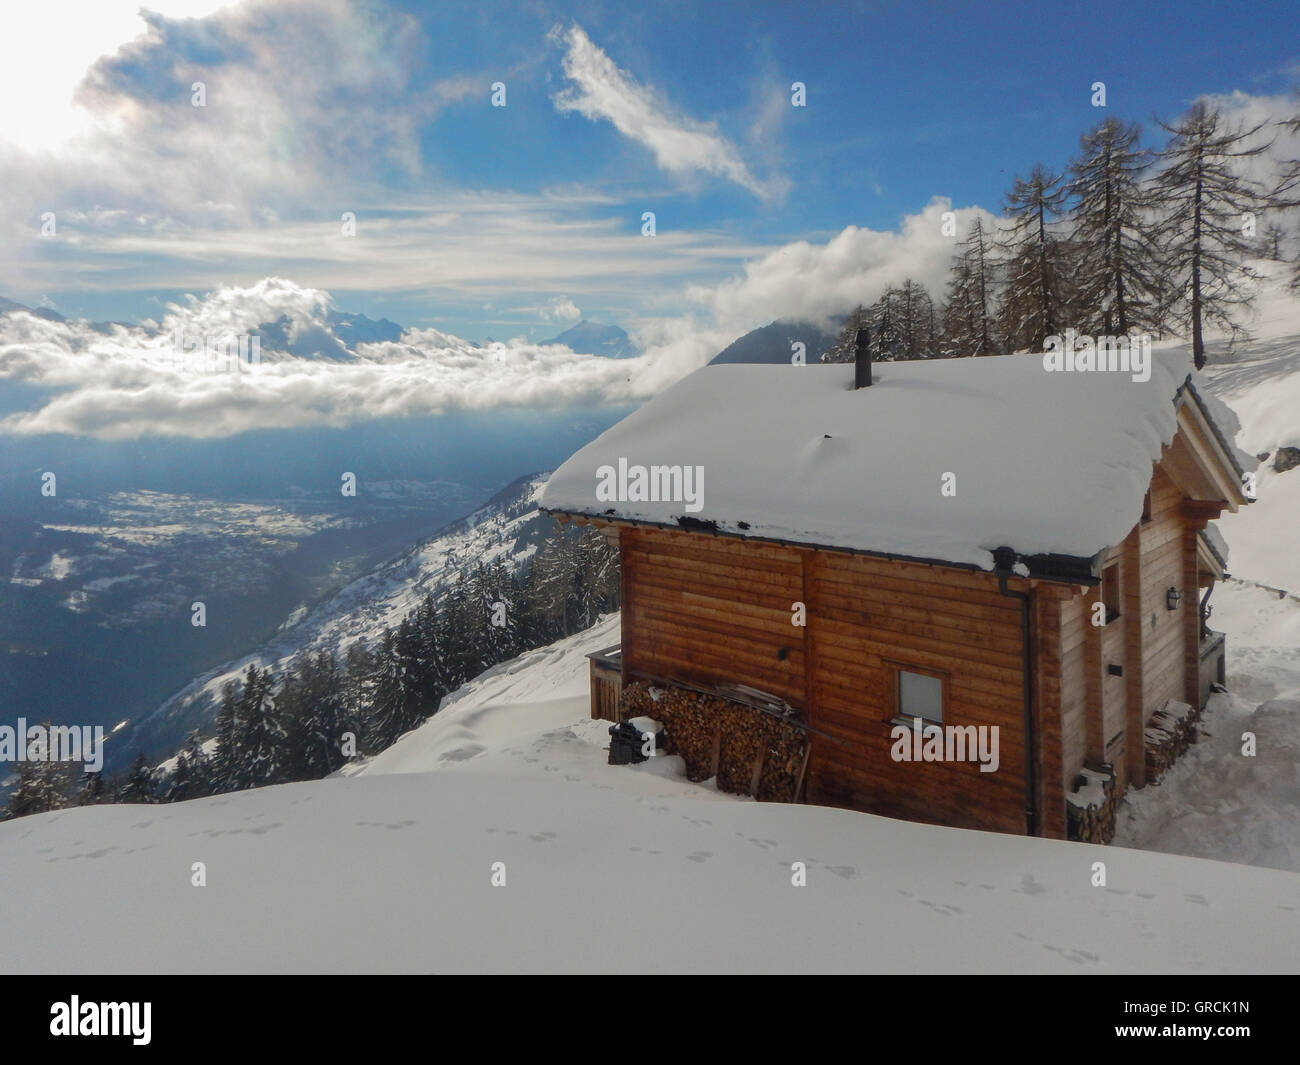 Snow Covered Chalet With A View To The Mountains Of The Valais As Wella Down Into The Valley. Blue Sky, Some Clouds. In The Foreground Snowcovered Slope. Sunny With Shadows. Stock Photo